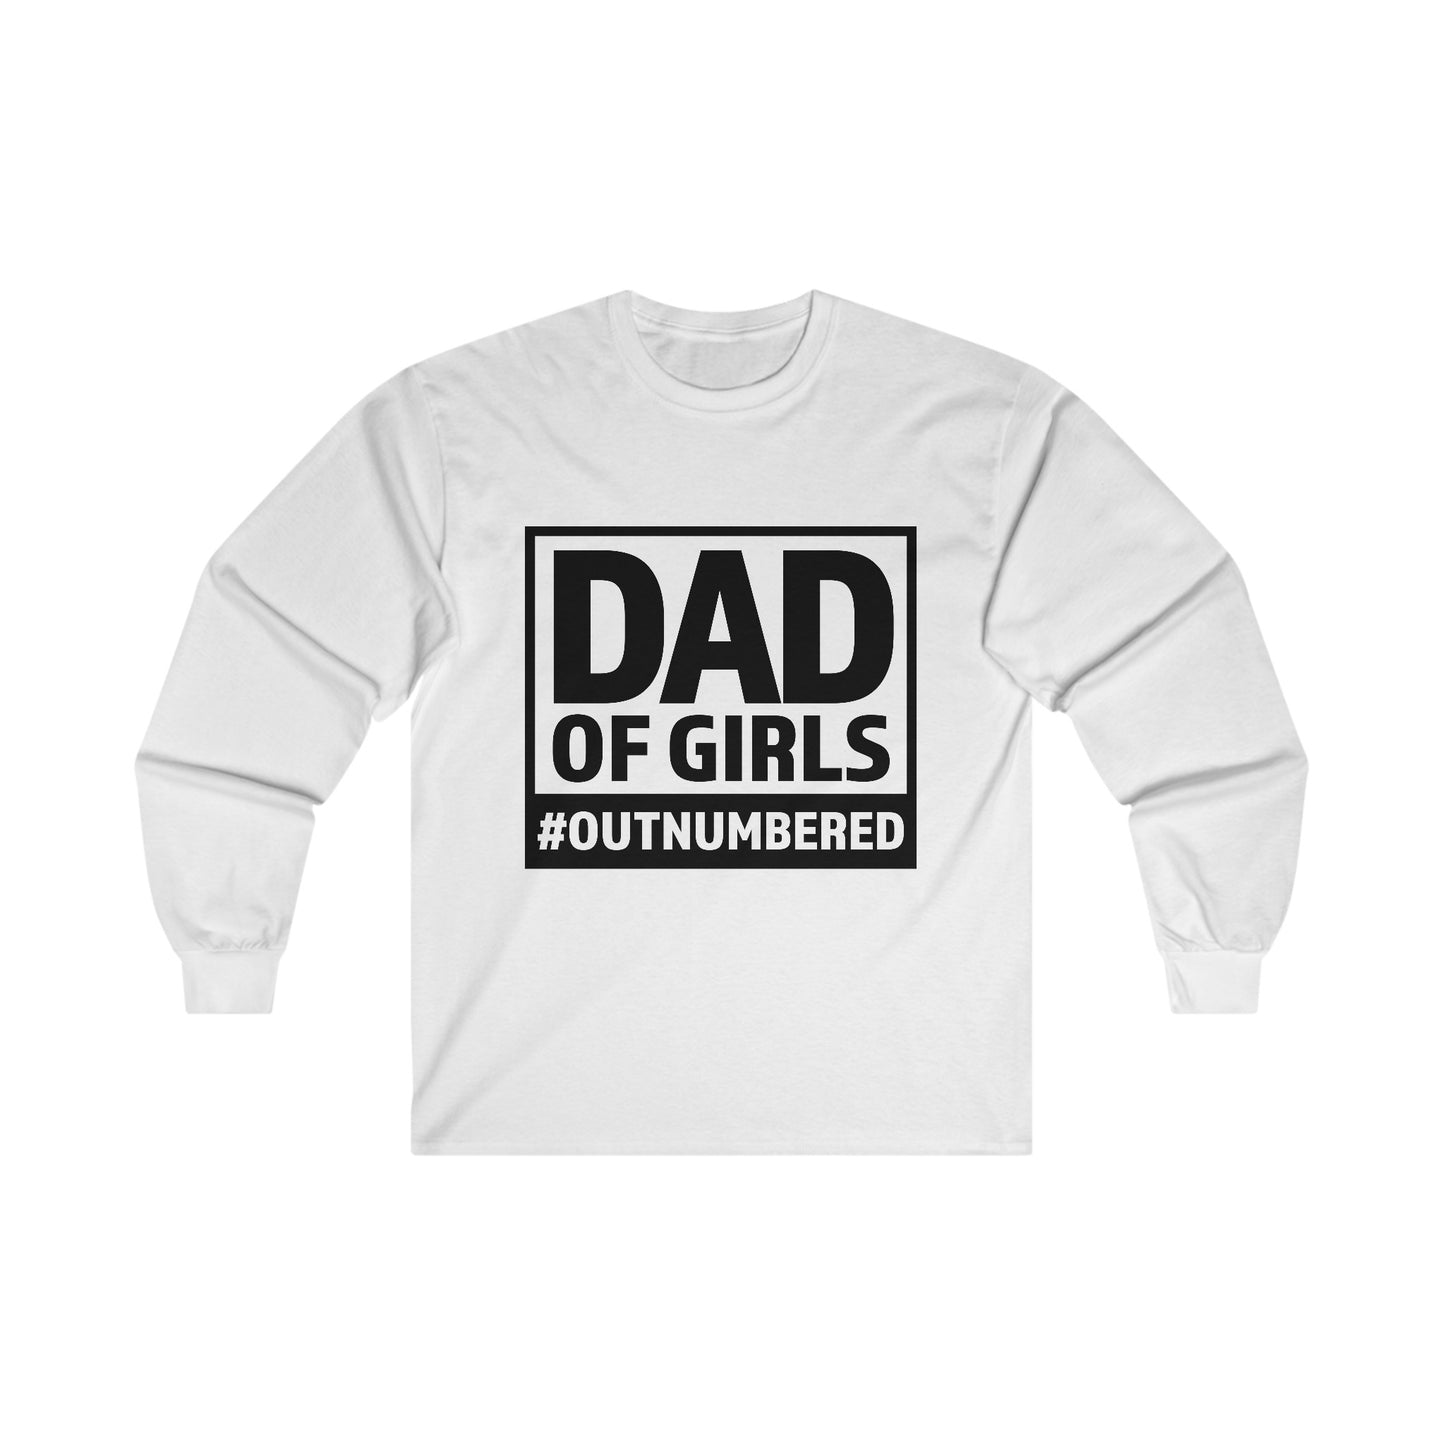 Dad of Girls Outnumbered Ultra Cotton Long Sleeve Tee